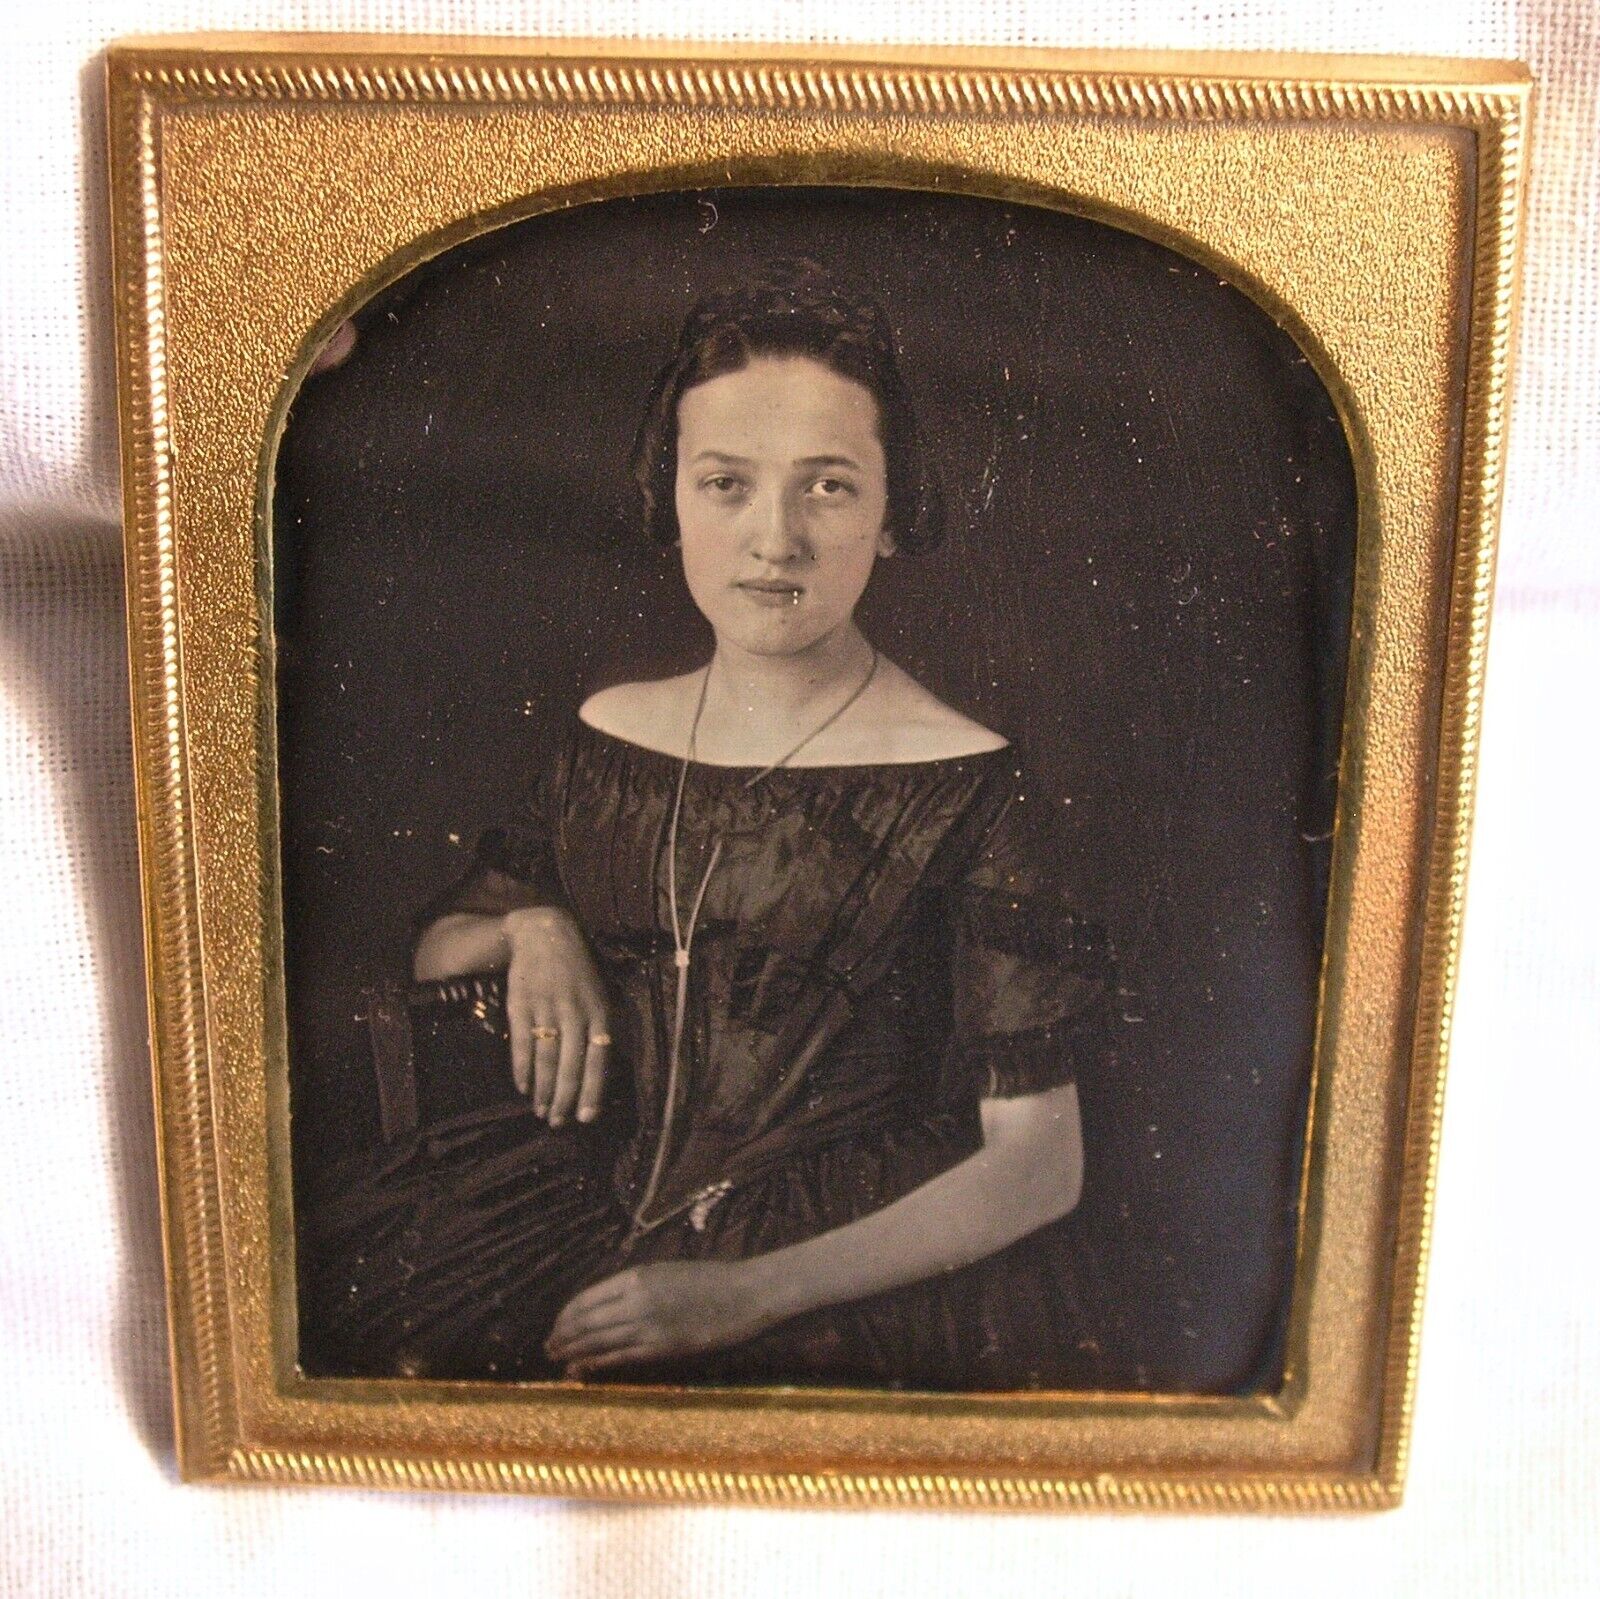 Antique Sixth Plate Daguerreotype Photo 1850's Woman with Cool Dress & Jewelry